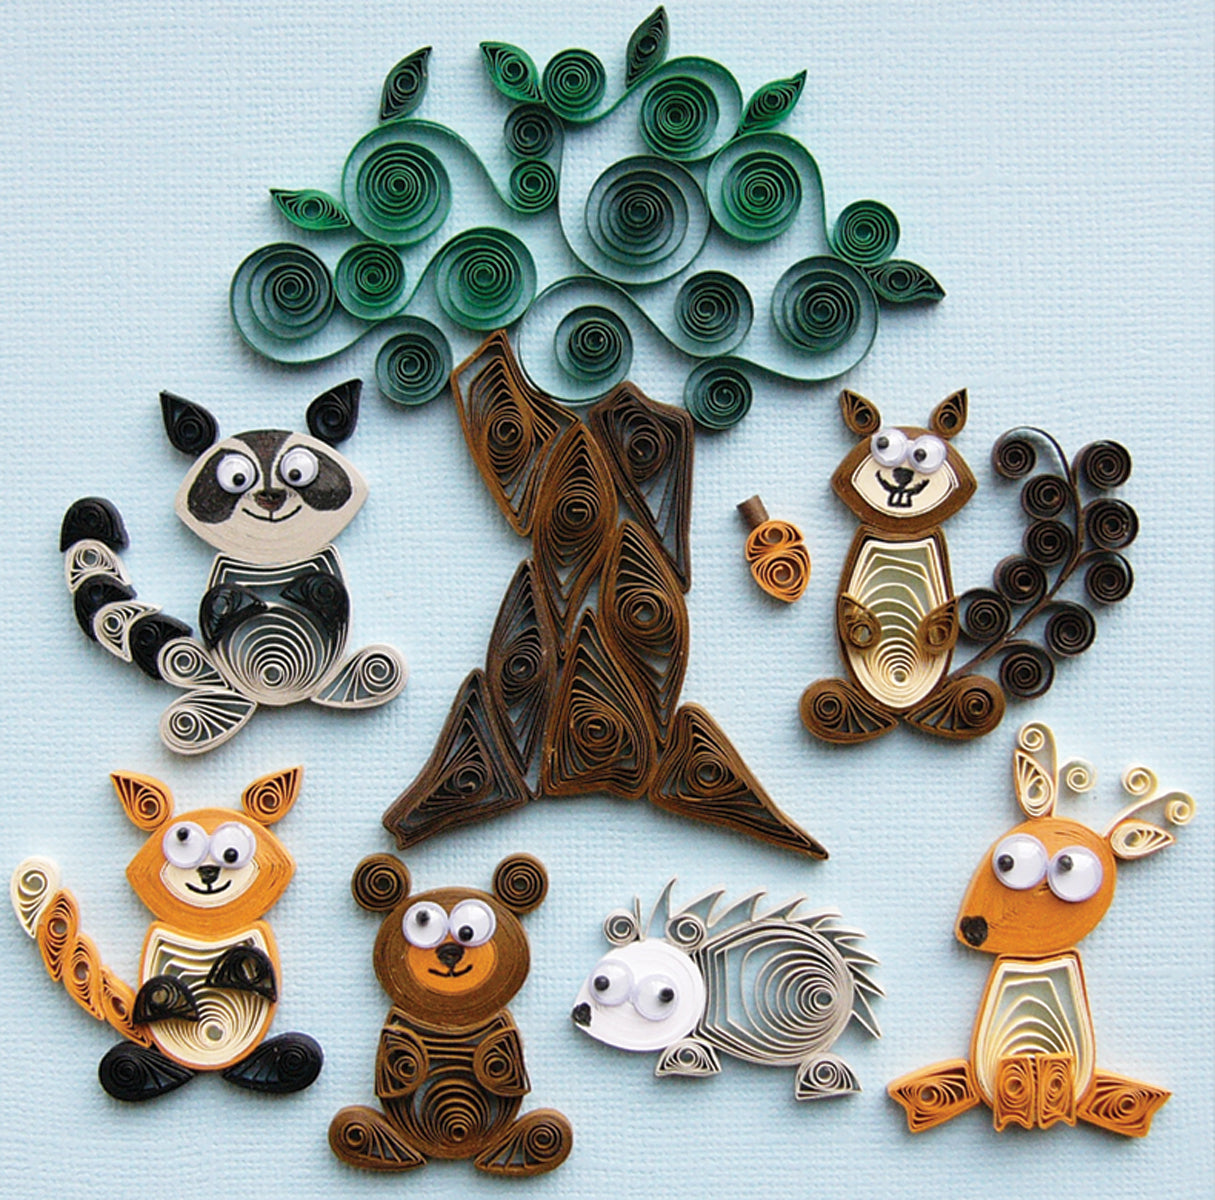 Quilling Kit-Forest Buddies